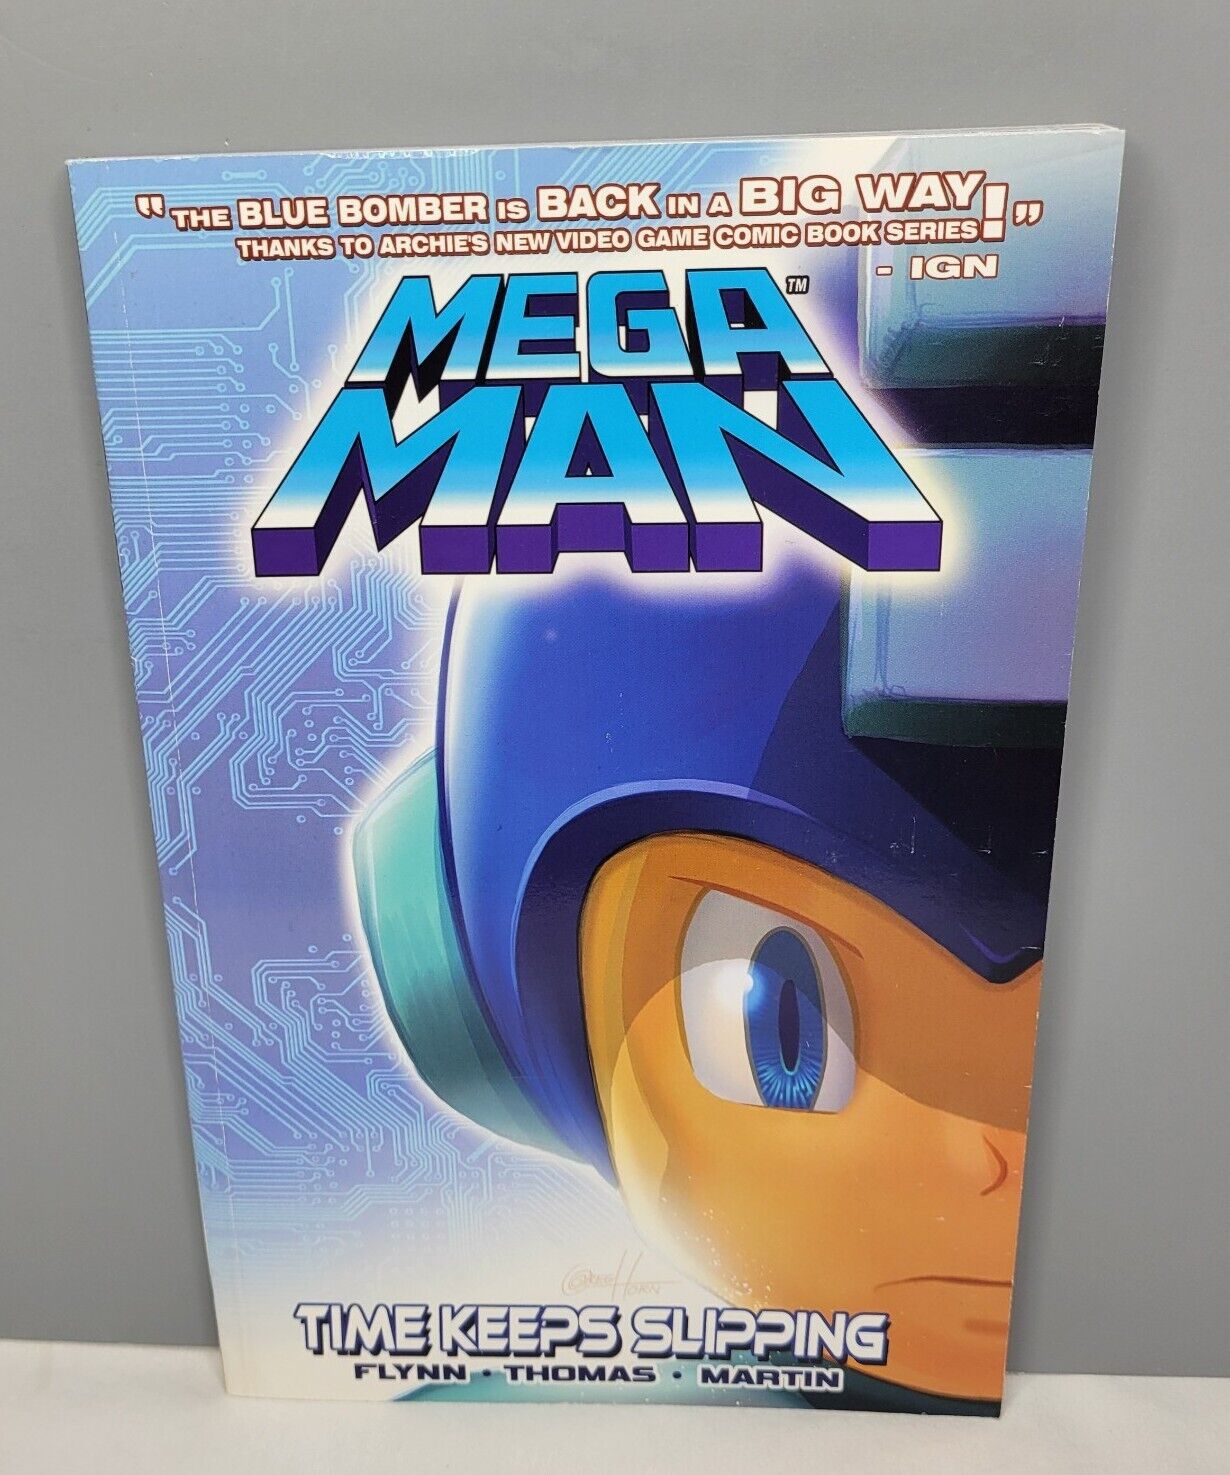 Mega Man 2: Time Keeps Slipping- New Other- Never Read ~Graphic Novel